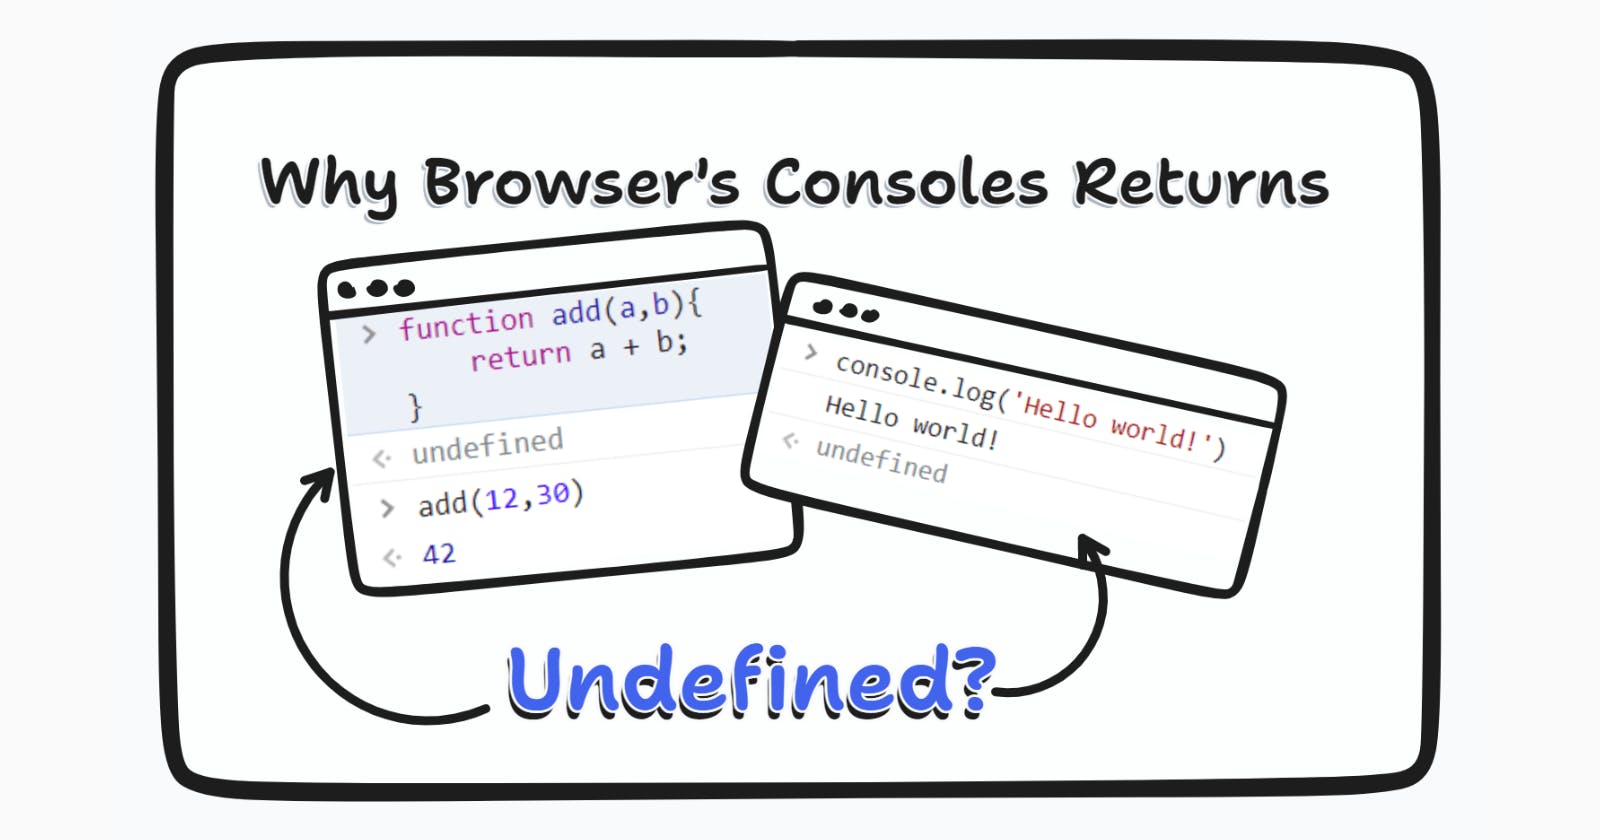 Why do browser consoles return undefined? Explained